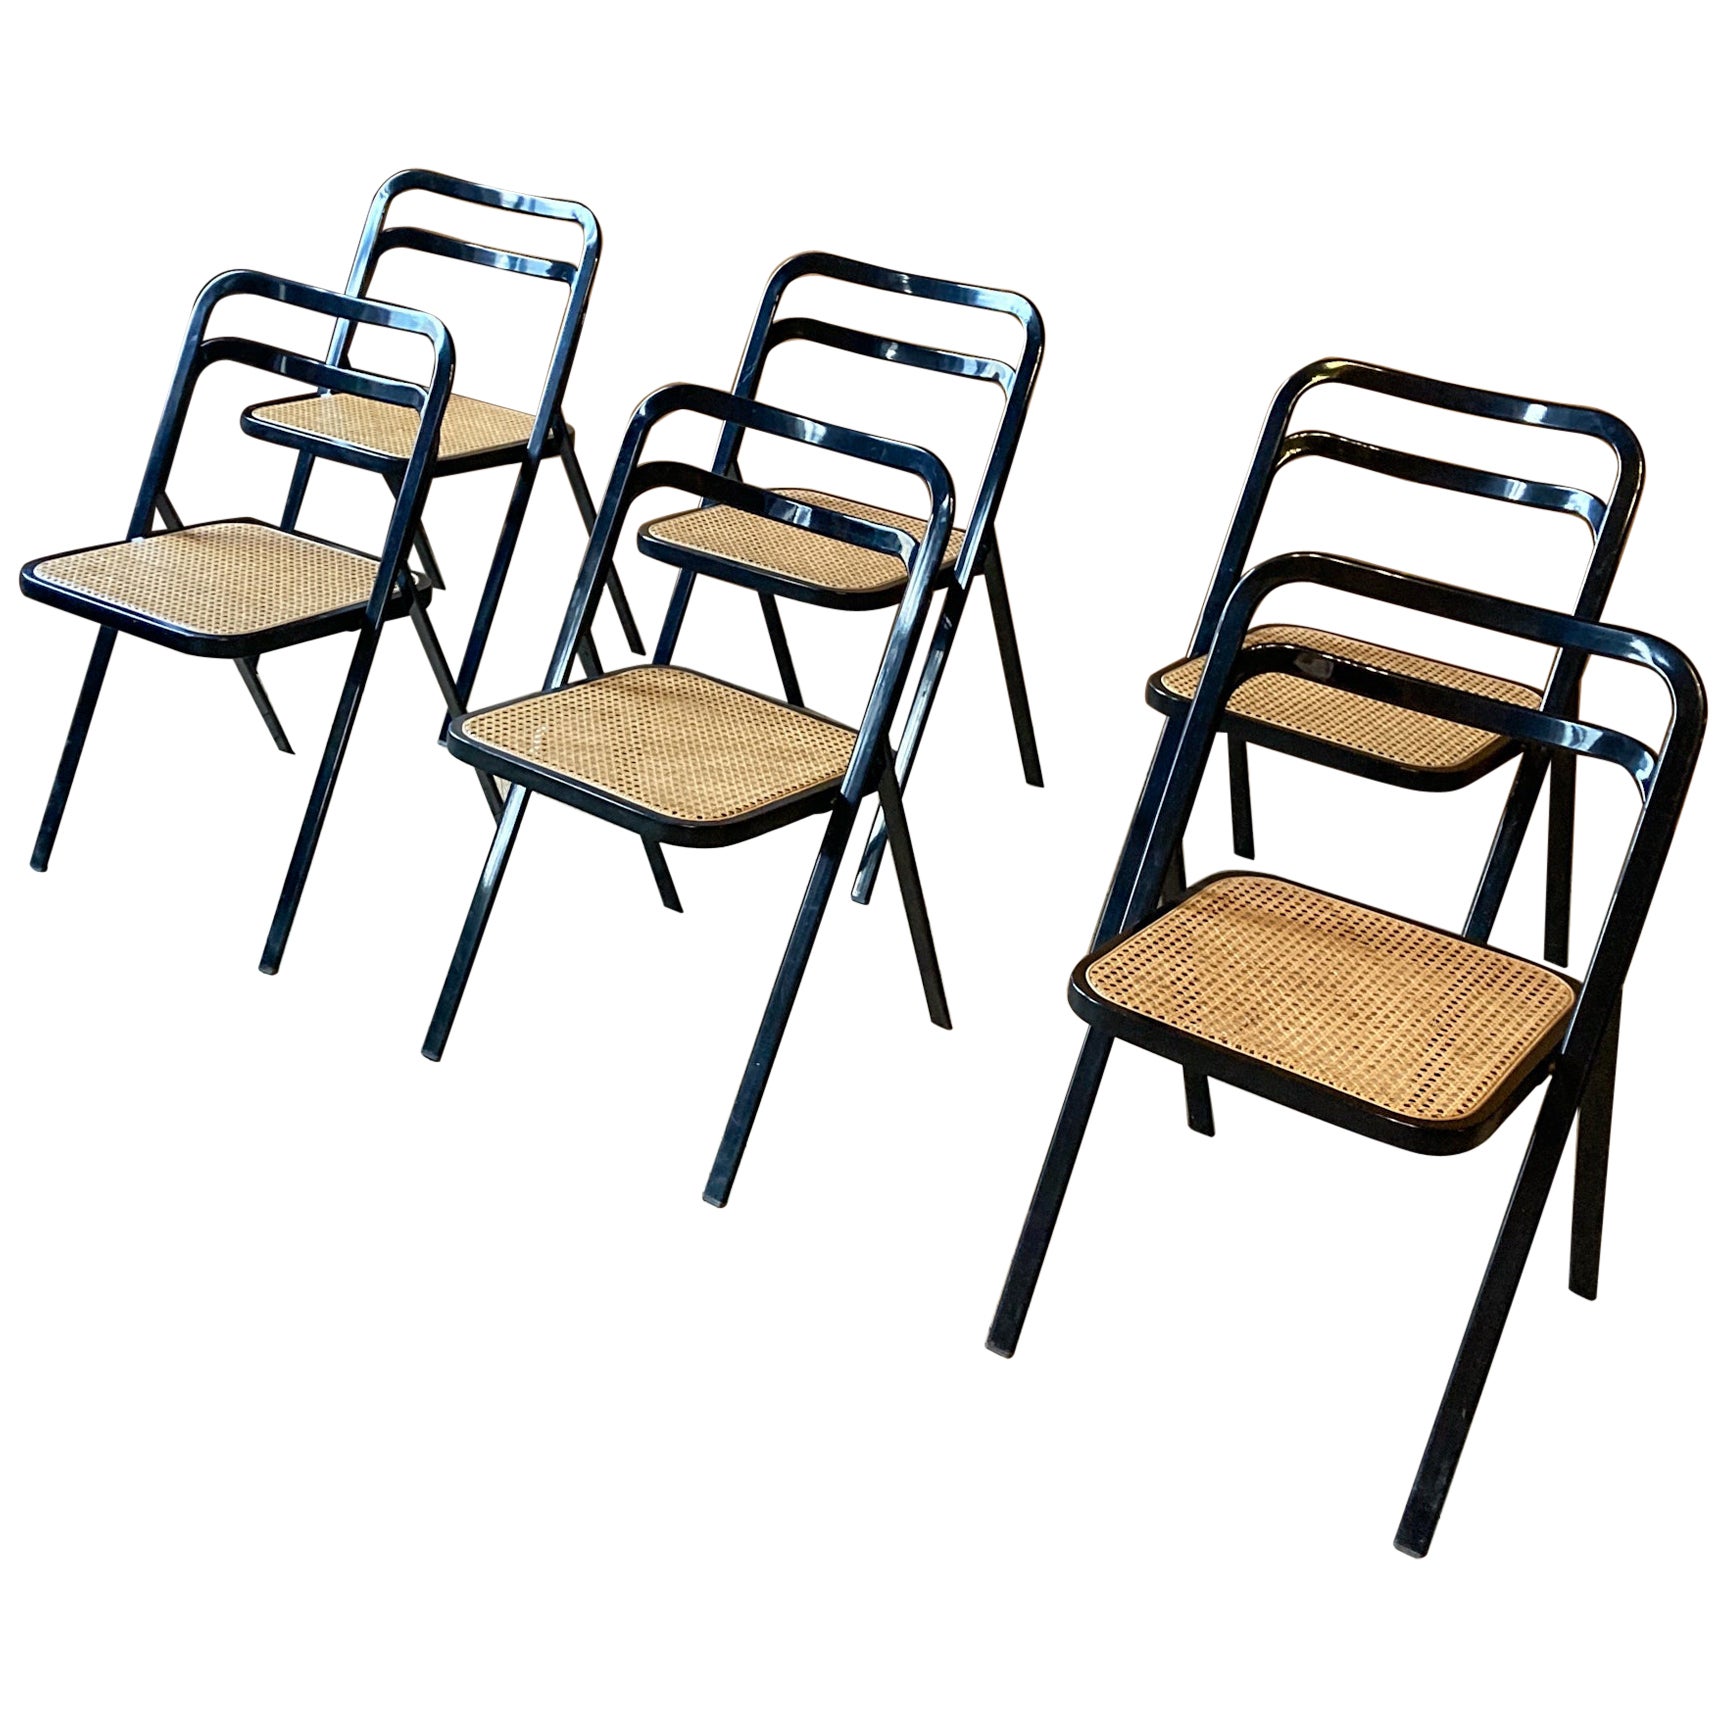 Mid-Century Modern Folding Chairs Viennese Straw by G. Cattelan, Italy 1970s For Sale